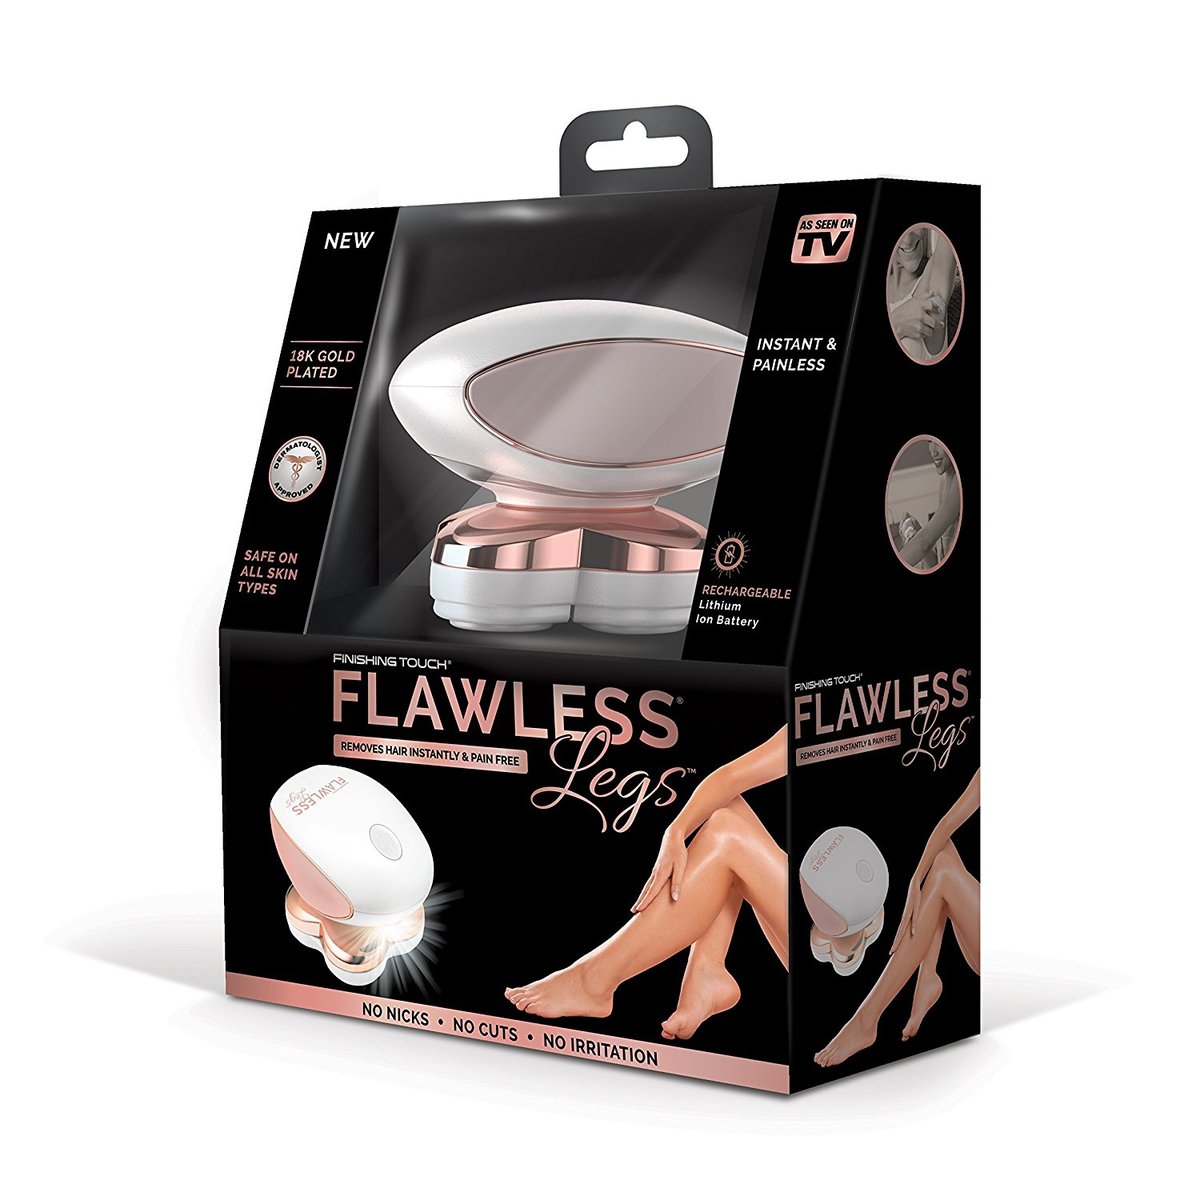 FLAWLESS LEGS Hair-Remover